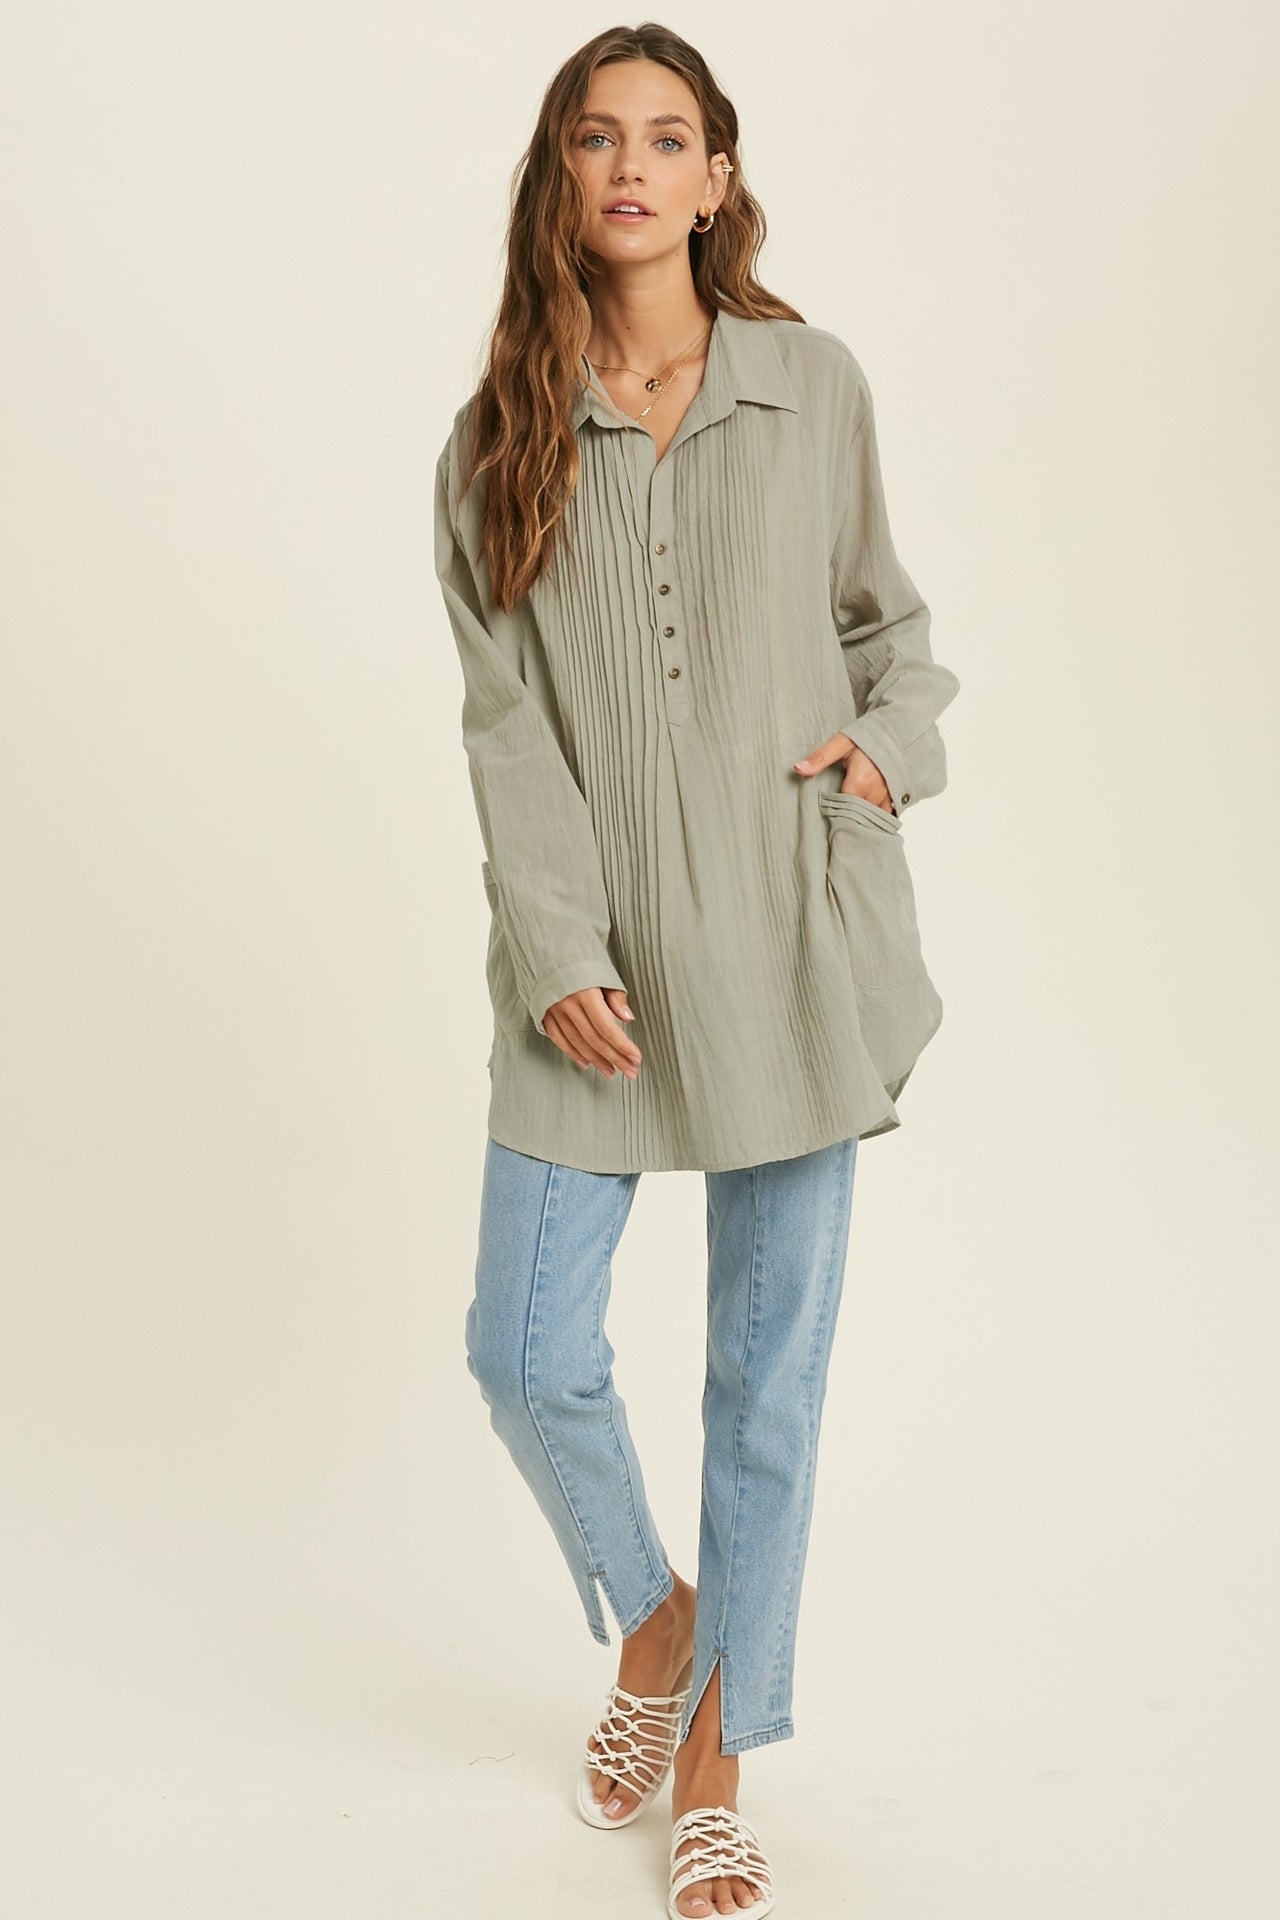 Showing a model wearing the Button Down Tunic Top in sage color.